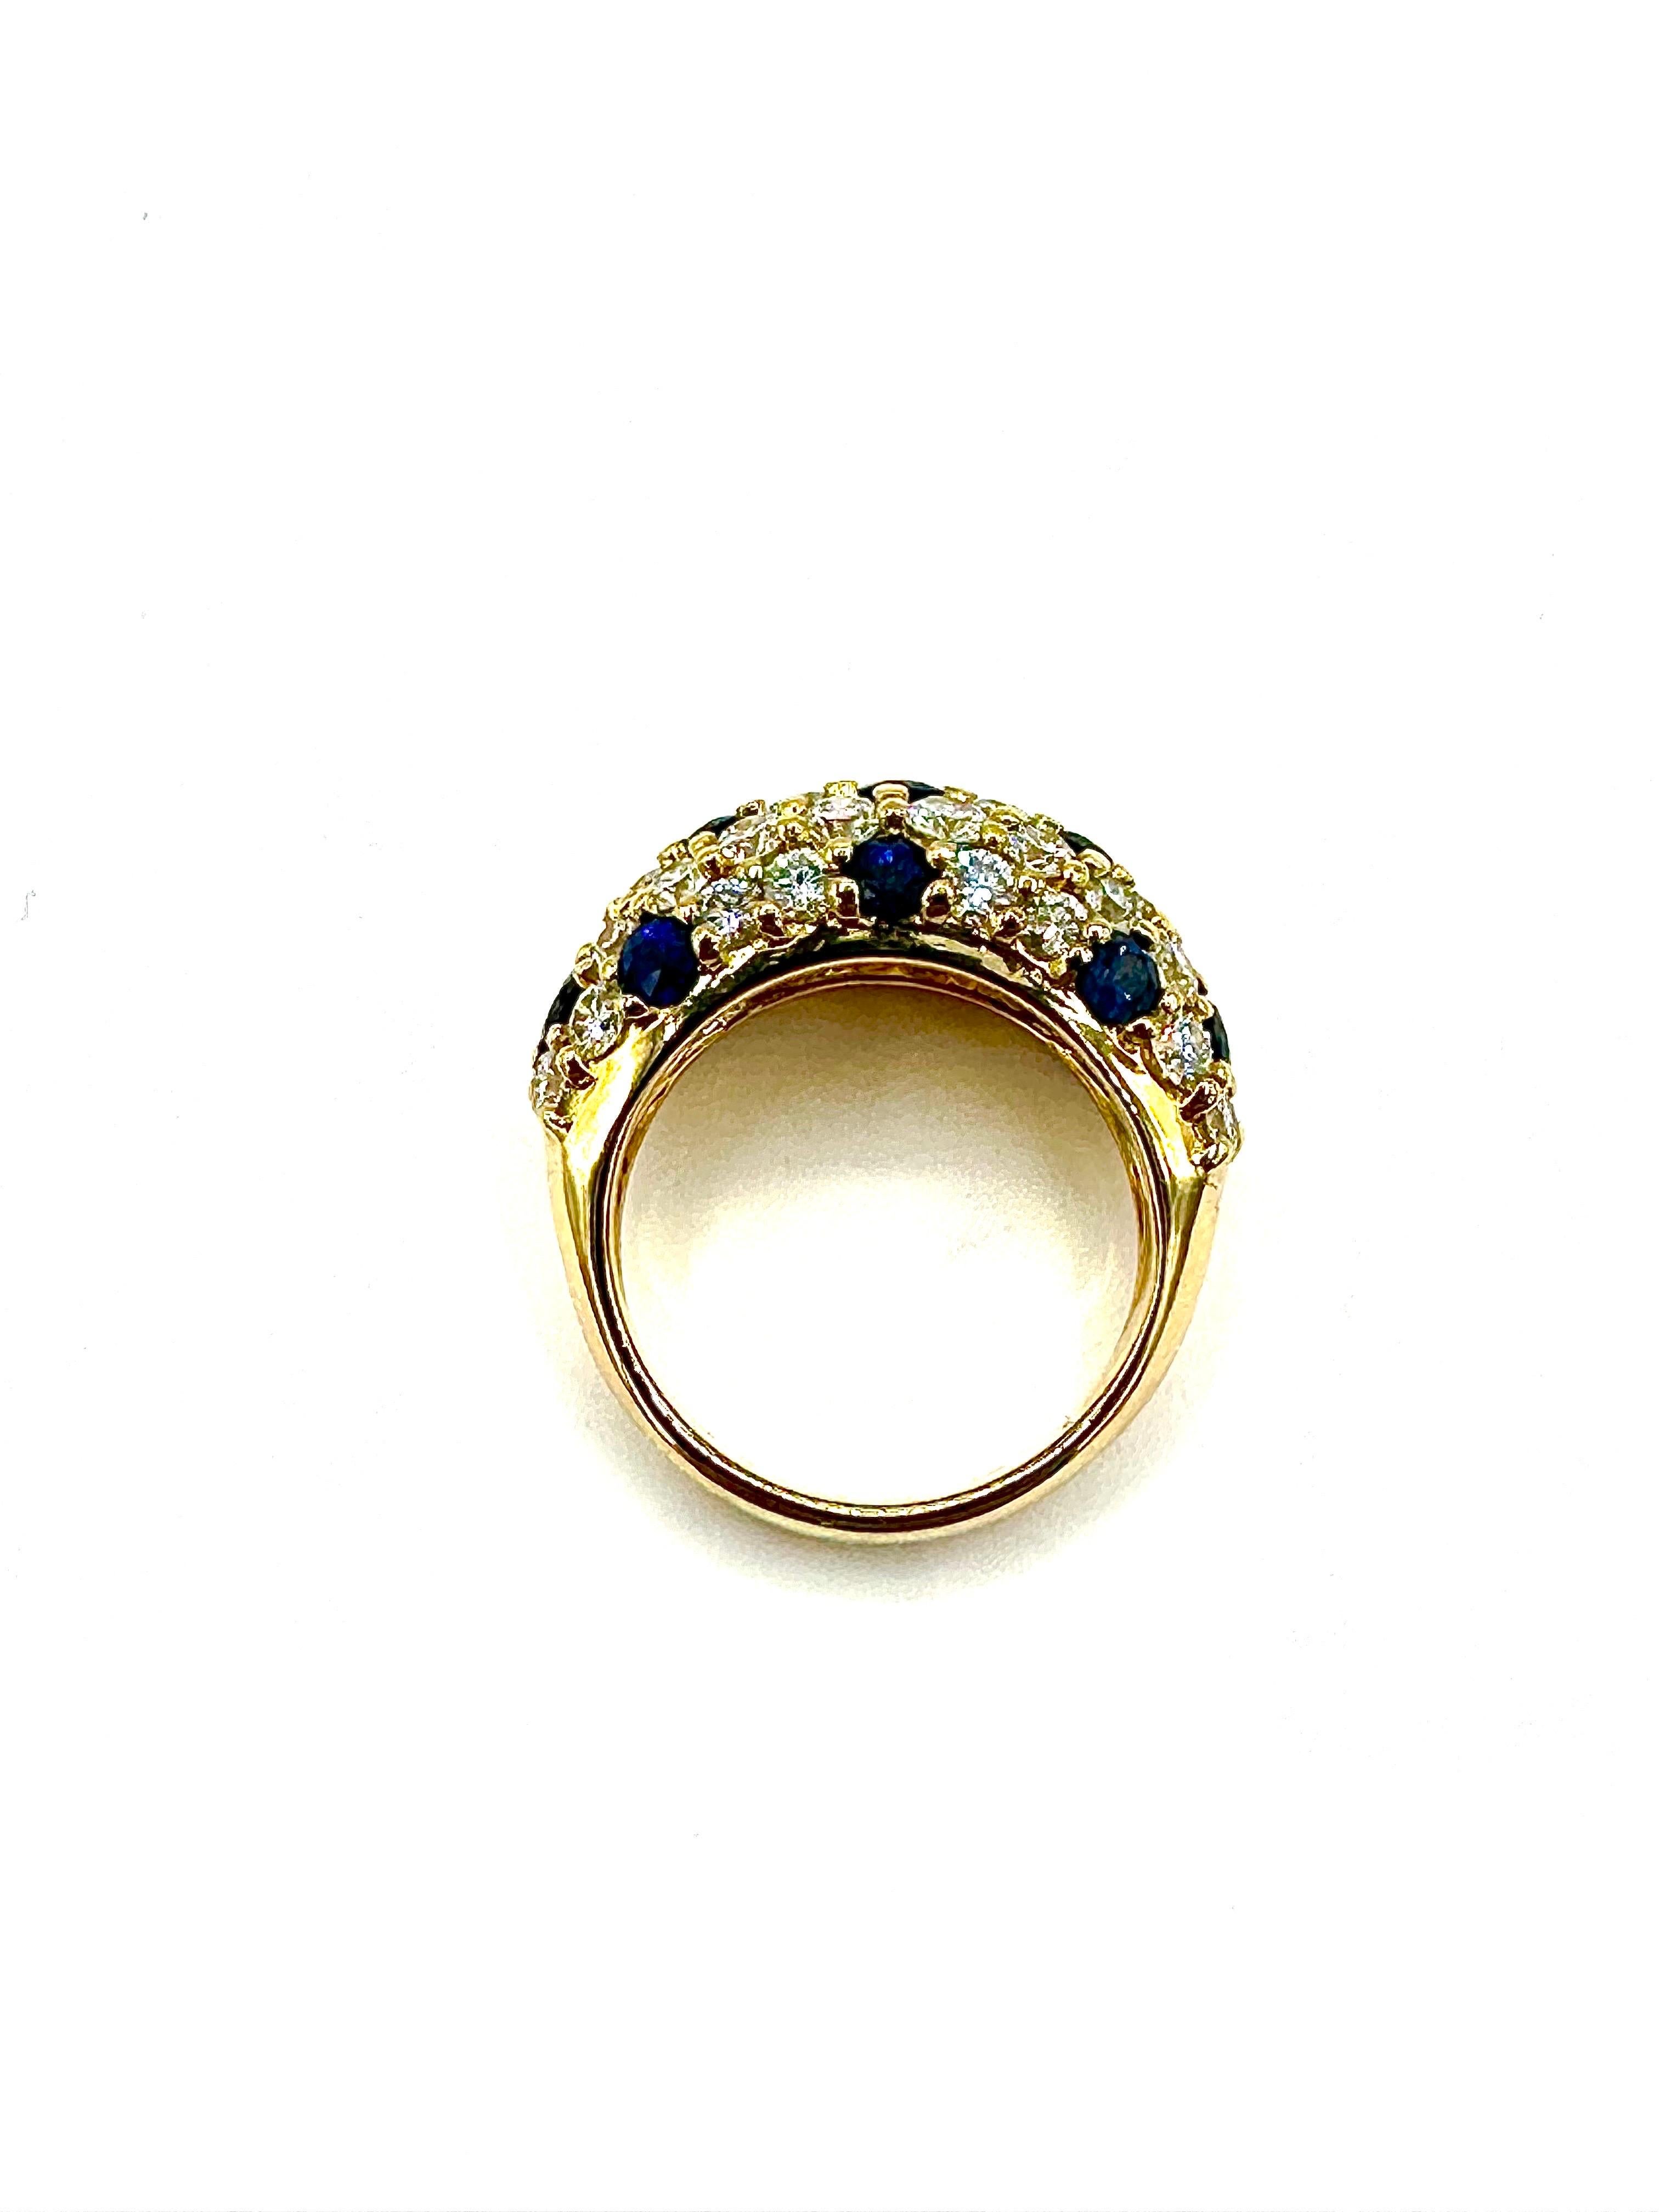 Women's or Men's Tiffany & Co. Bombe Diamond and Sapphire 18K Yellow Gold Domed Band Ring